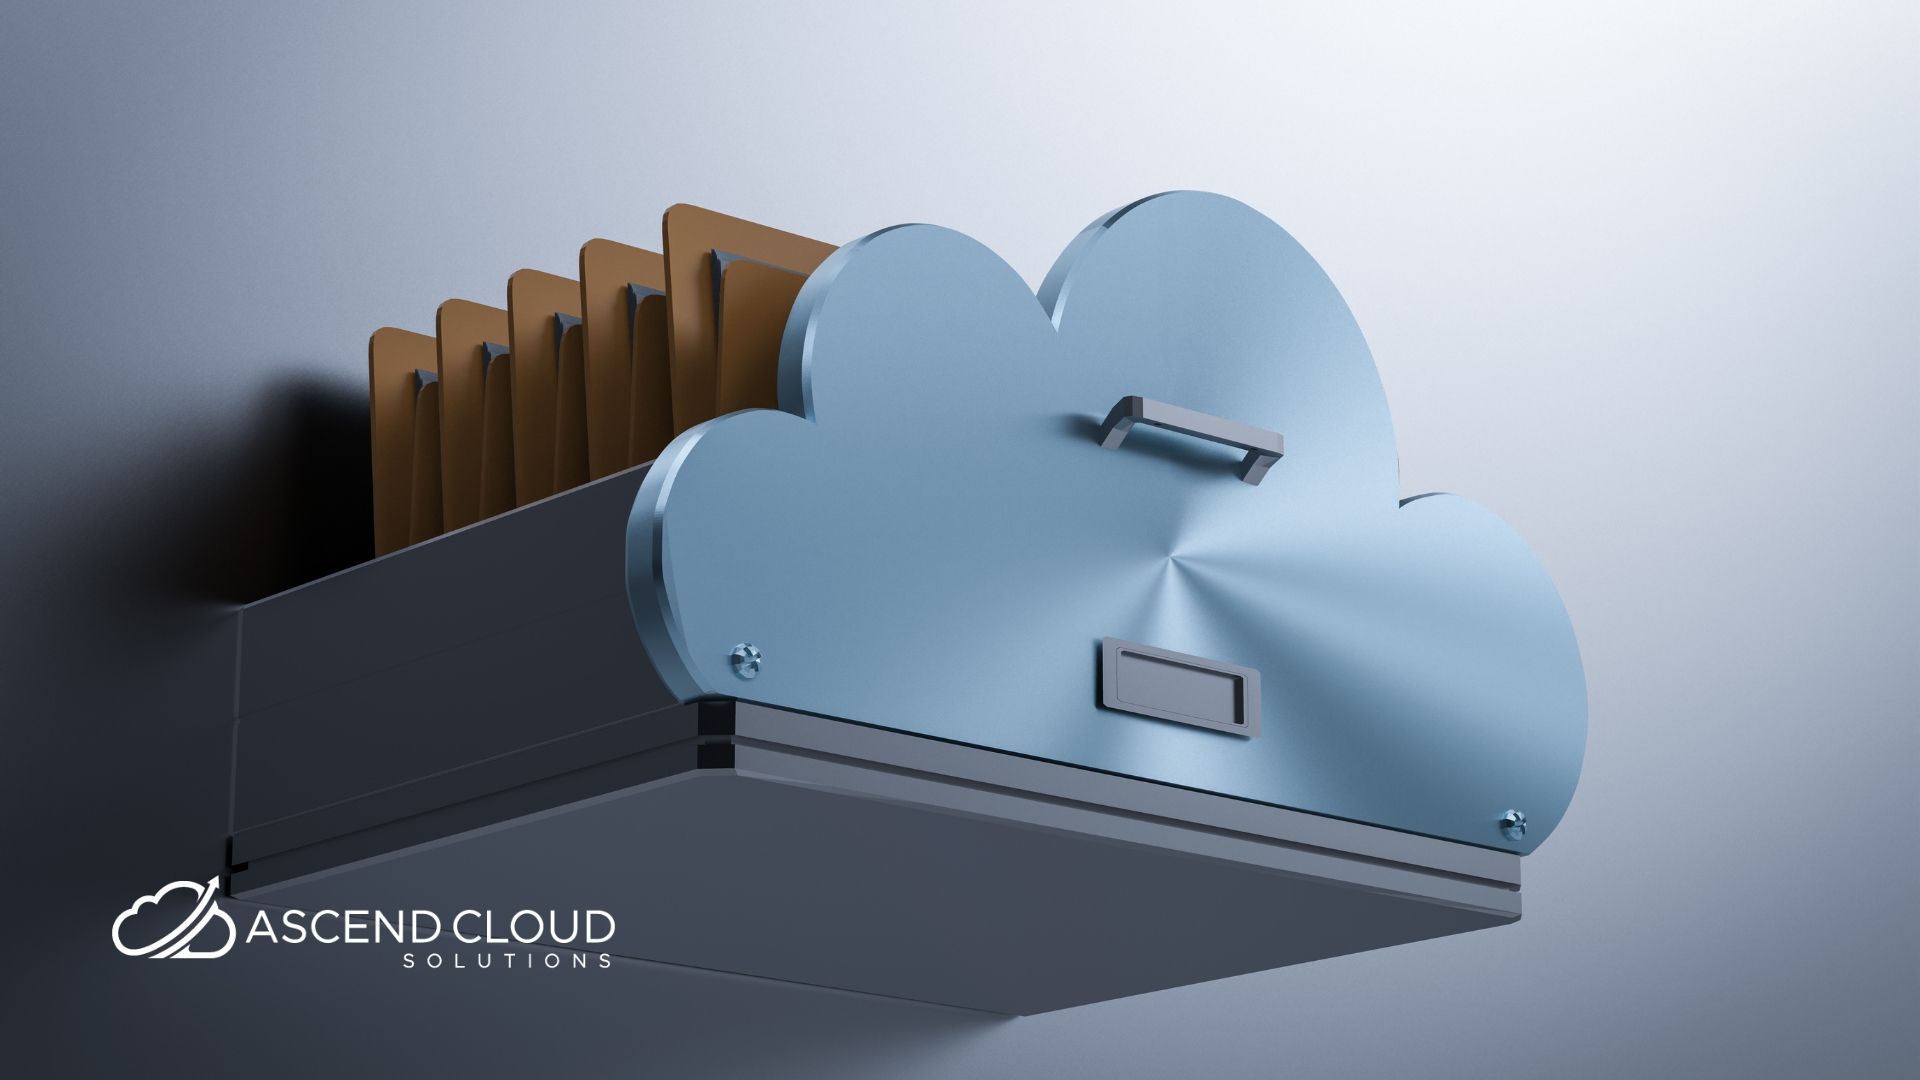 For some, containers are an essential part of any cloud modernisation process. But are they right for you? Find out in our article.